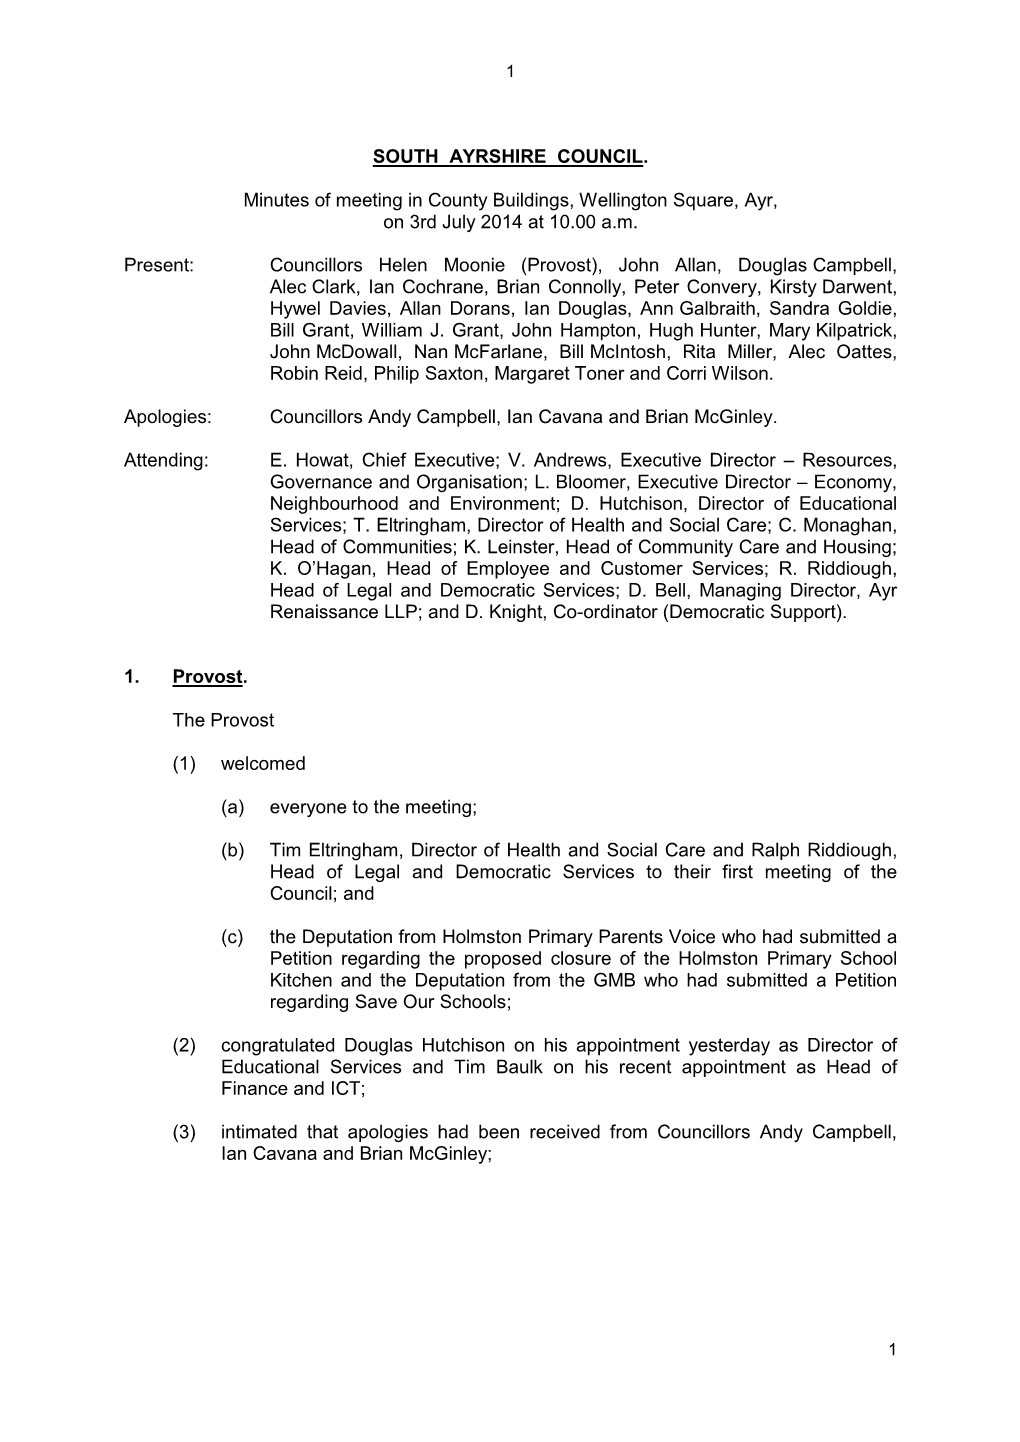 SOUTH AYRSHIRE COUNCIL. Minutes of Meeting in County